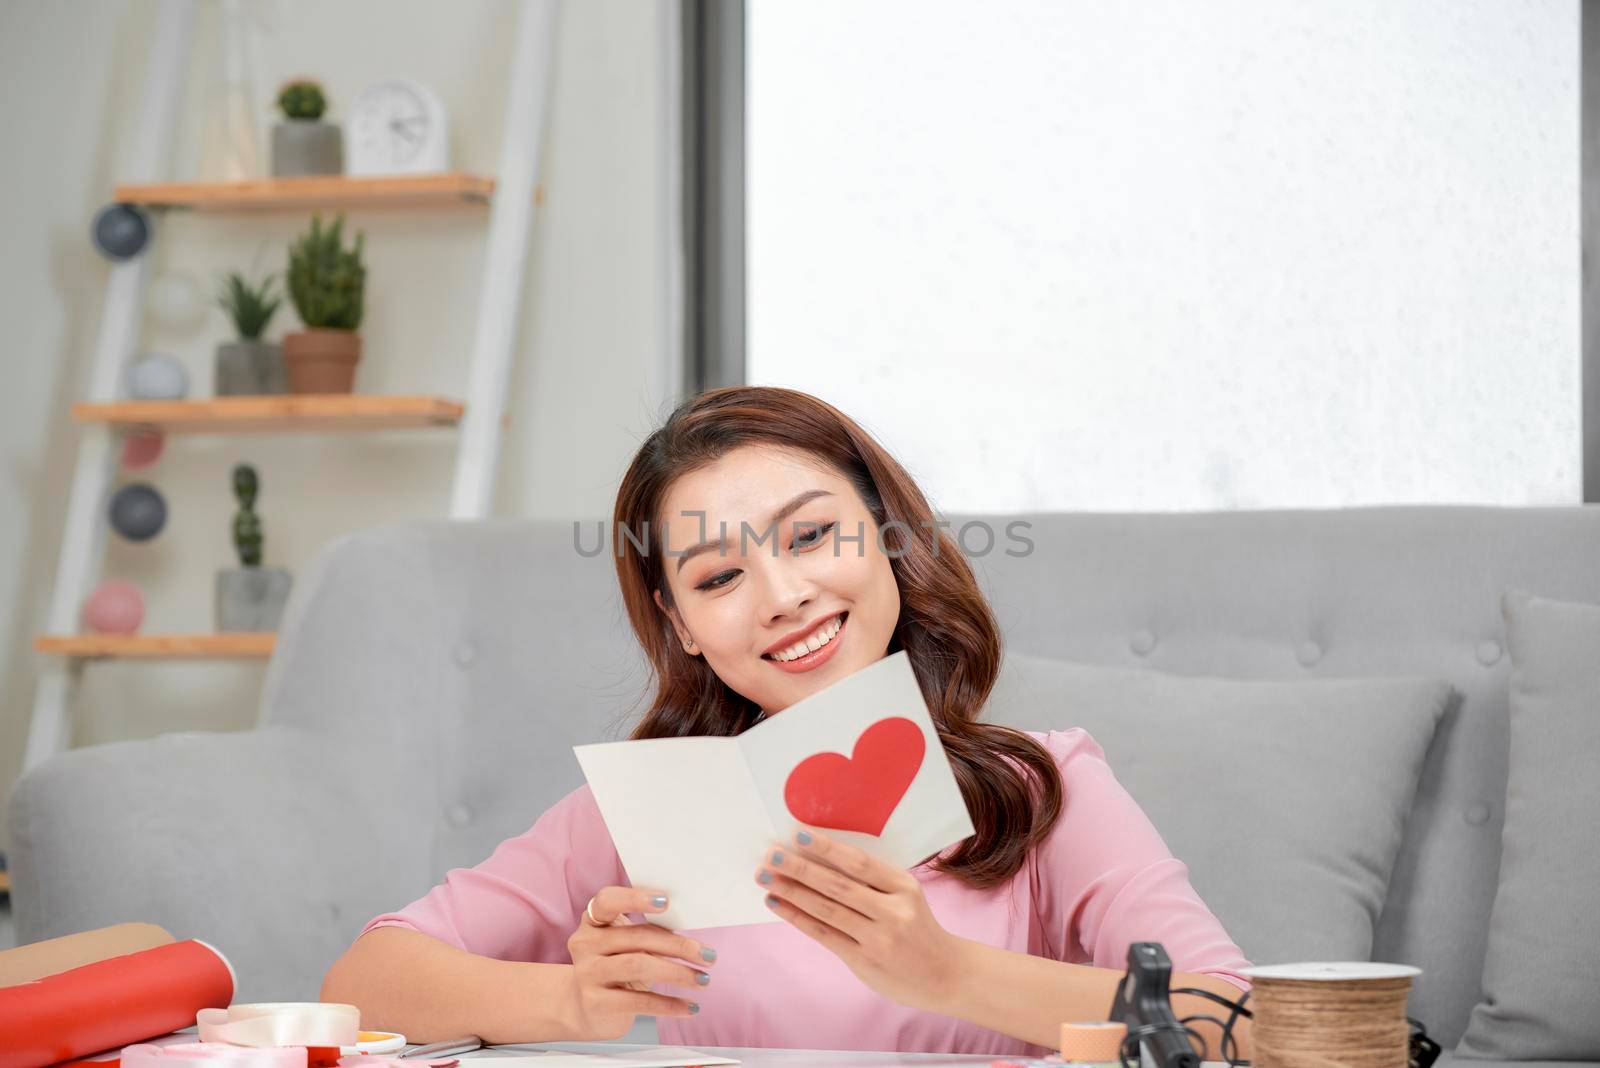 Valentine day theme. Beautiful romantic woman making present for her couple